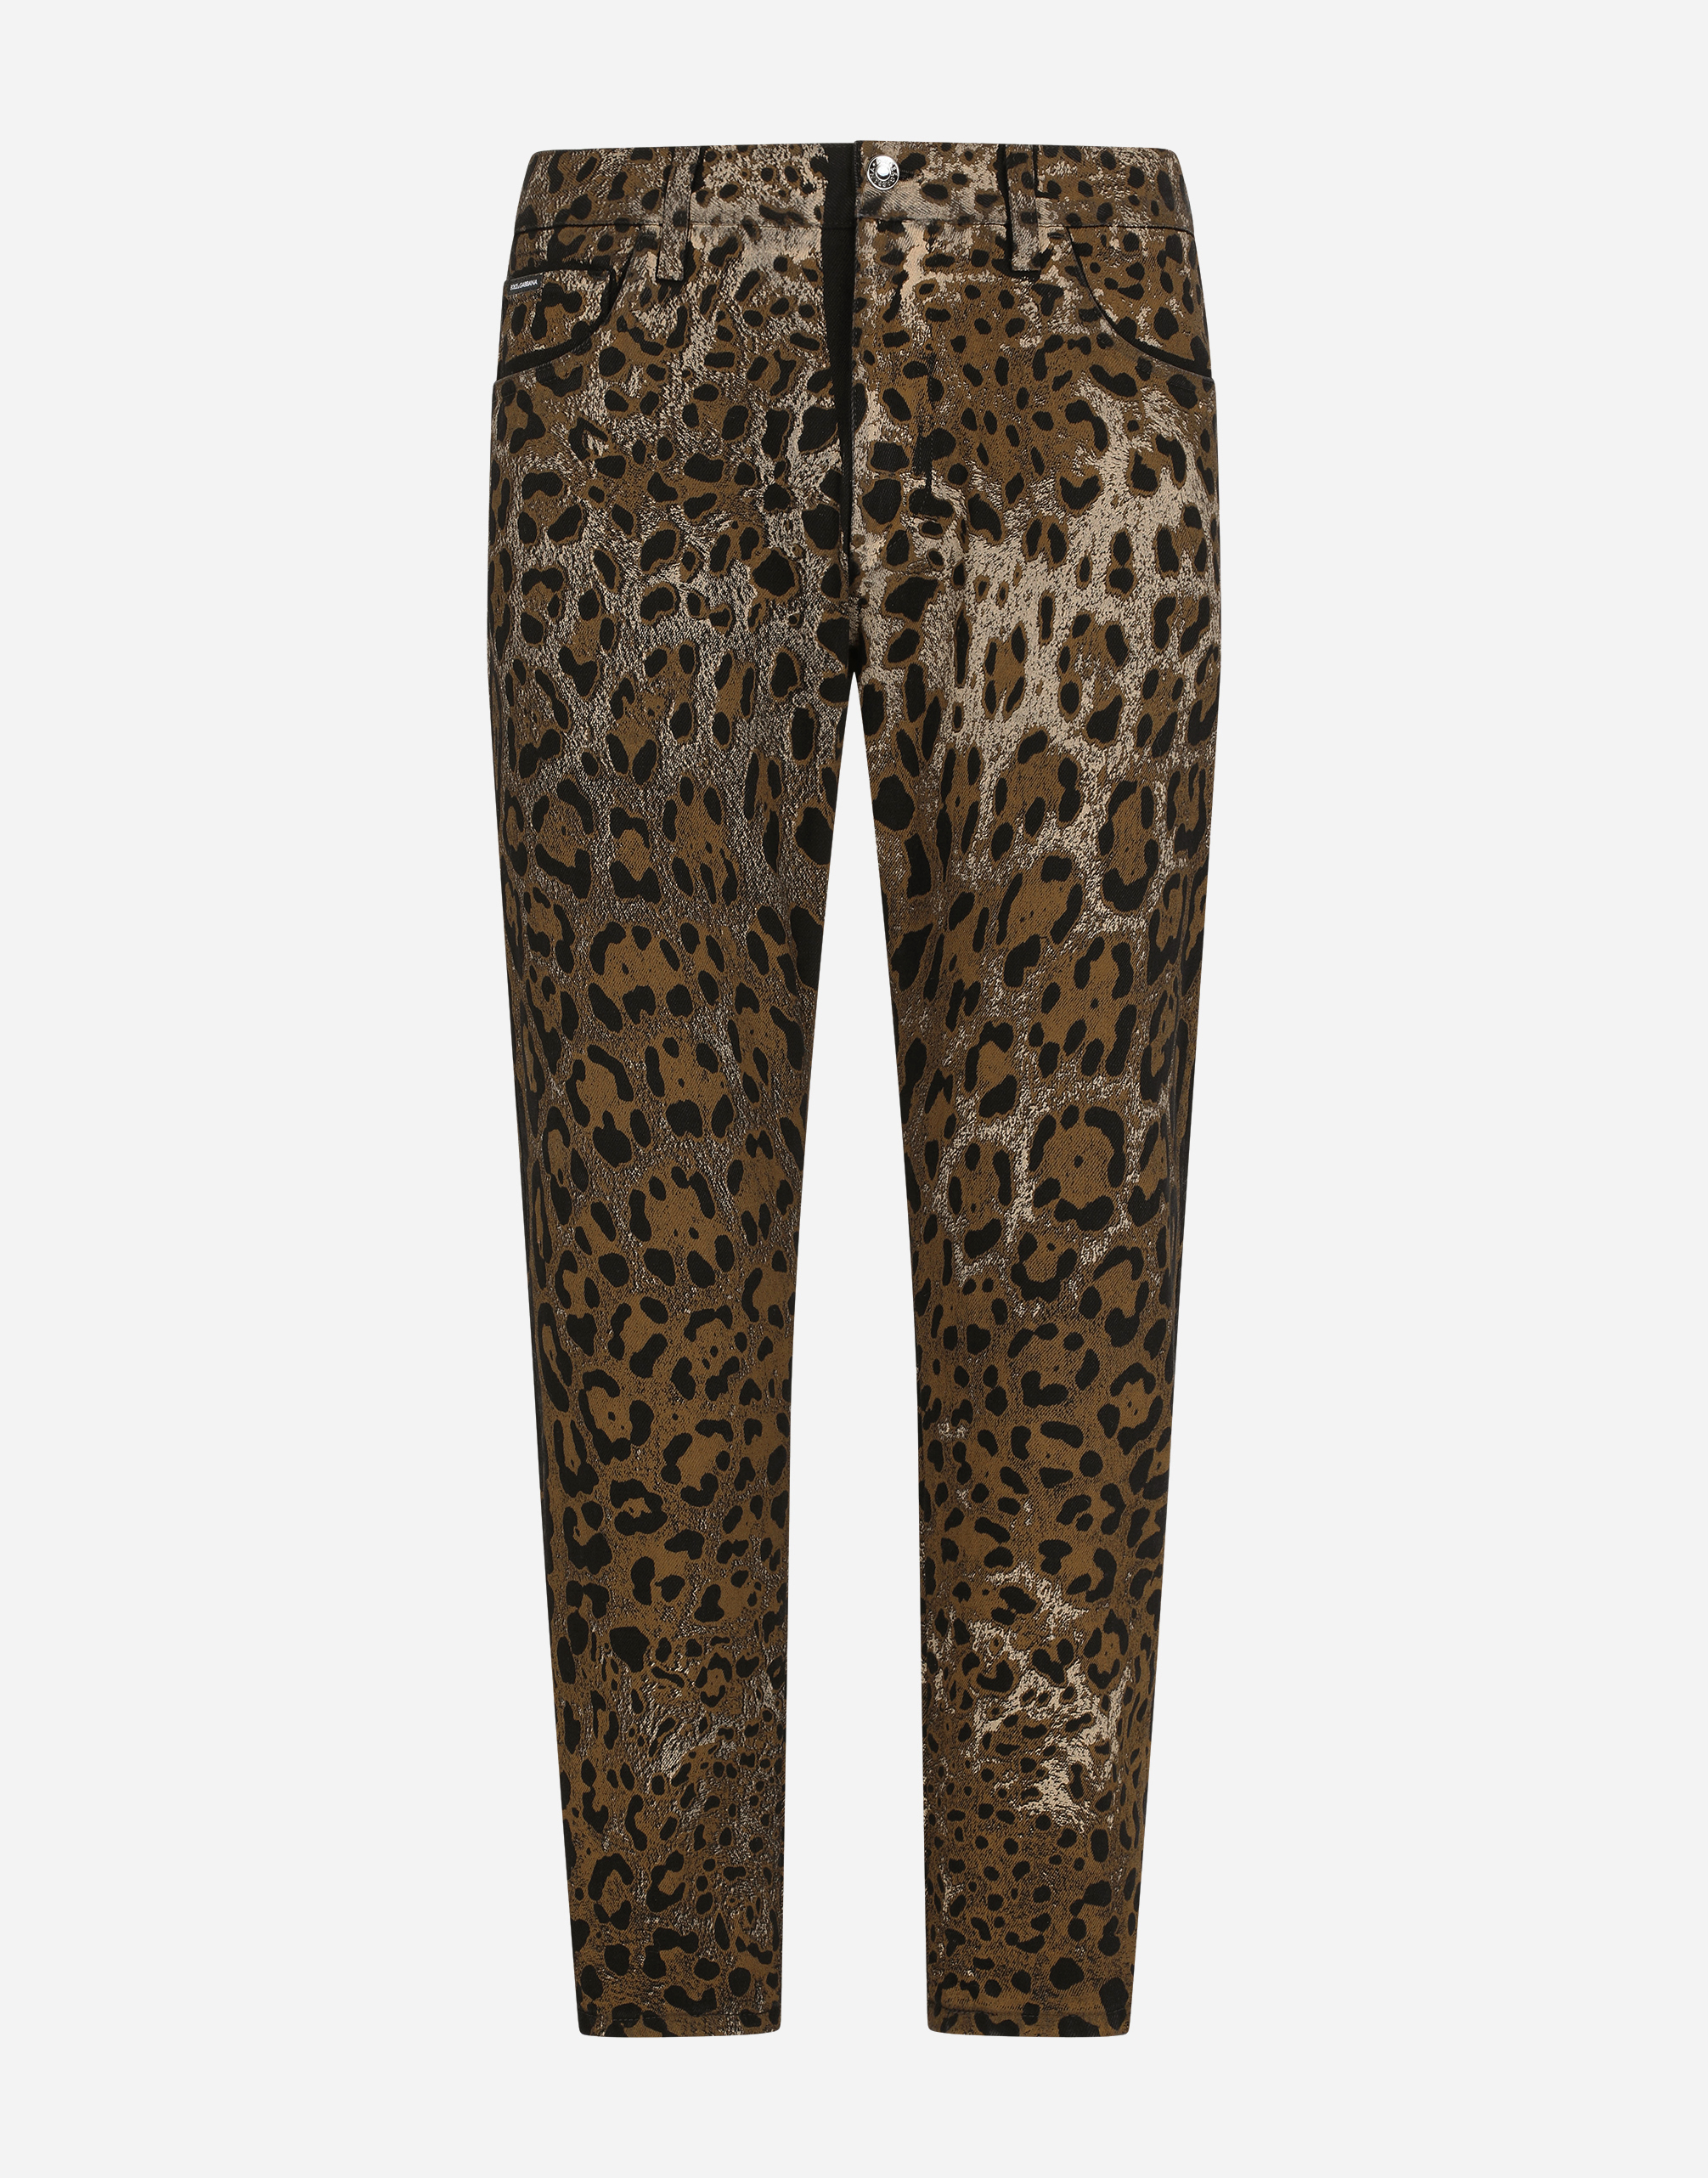 Loose jeans with DG leopard print